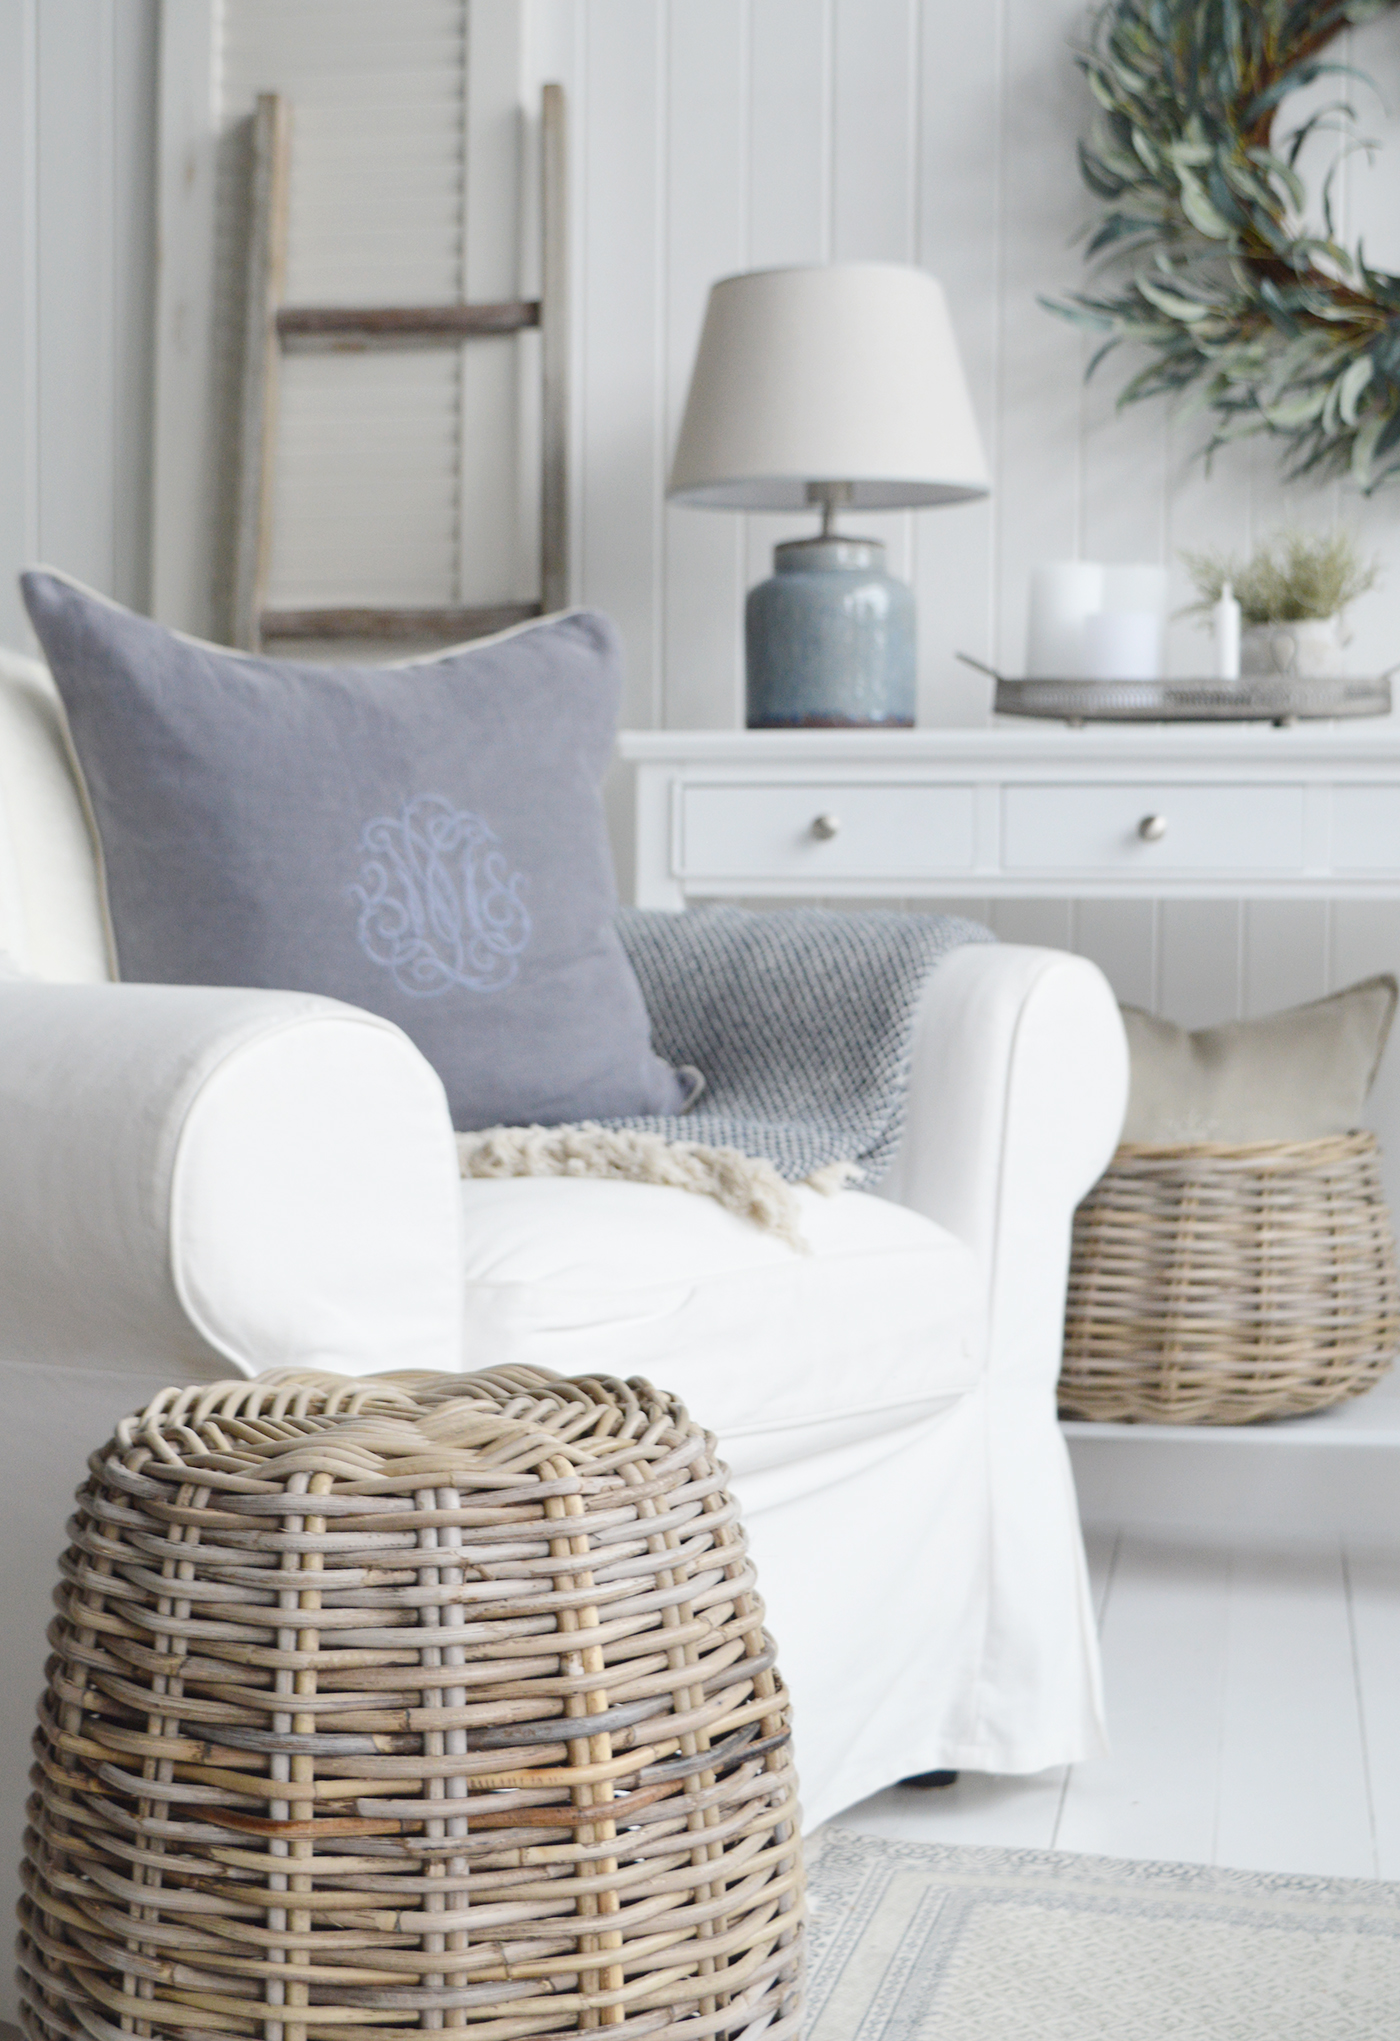 New England coastal and Modern farmhouse furniture and interiors. The Casco Bay stool with white furniture